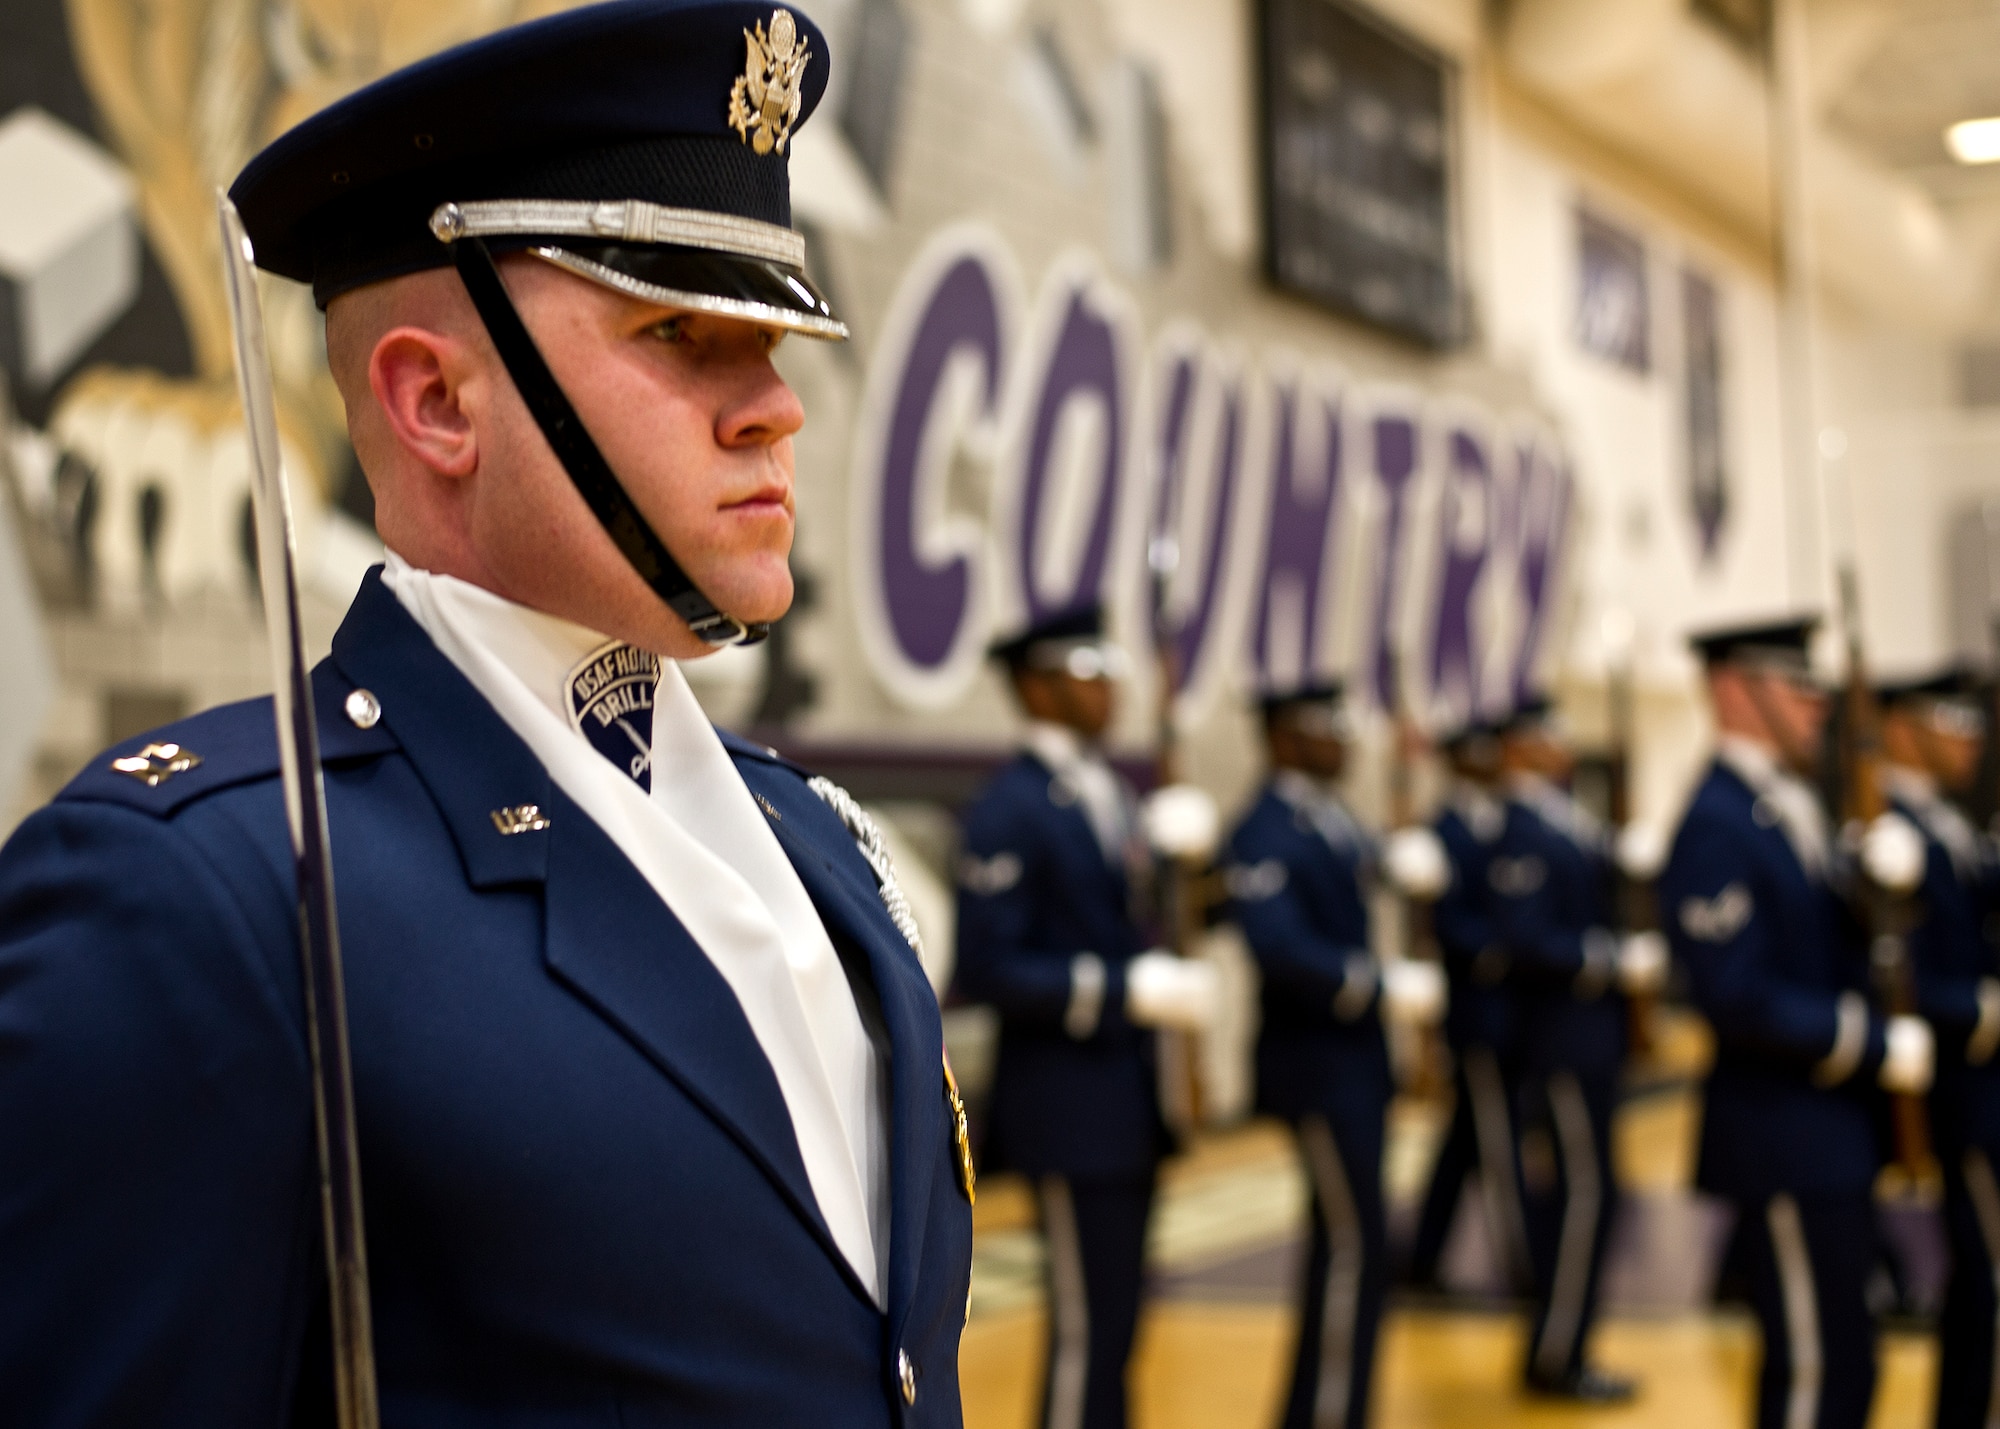 Capt. Alexander Stanton, U.S. Air Force Honor Guard Drill Team commander, stands at attention alongside the members of the Drill Team at a performance Feb. 6, 2013 at Battlefield High School in Haymarket, Va. The performance was Stanton’s final performance with the Drill Team. (U.S. Air Force photo/ Senior Airman Bahja Joi Jones)